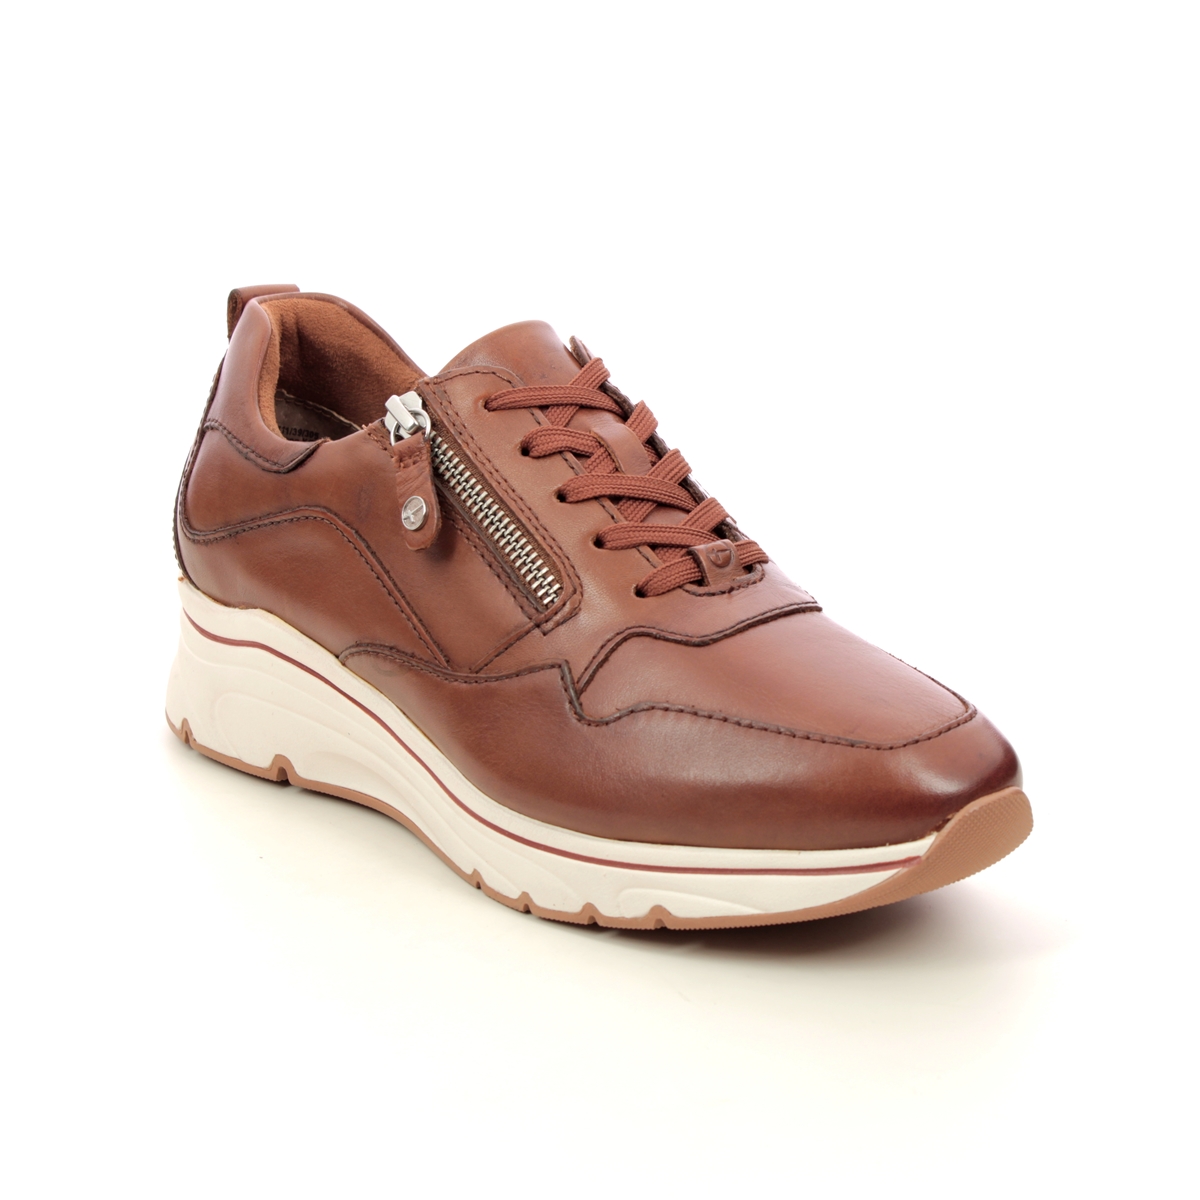 Tamaris Vinnie Tan Leather  Womens Trainers 23711-39-305 In Size 39 In Plain Tan Leather